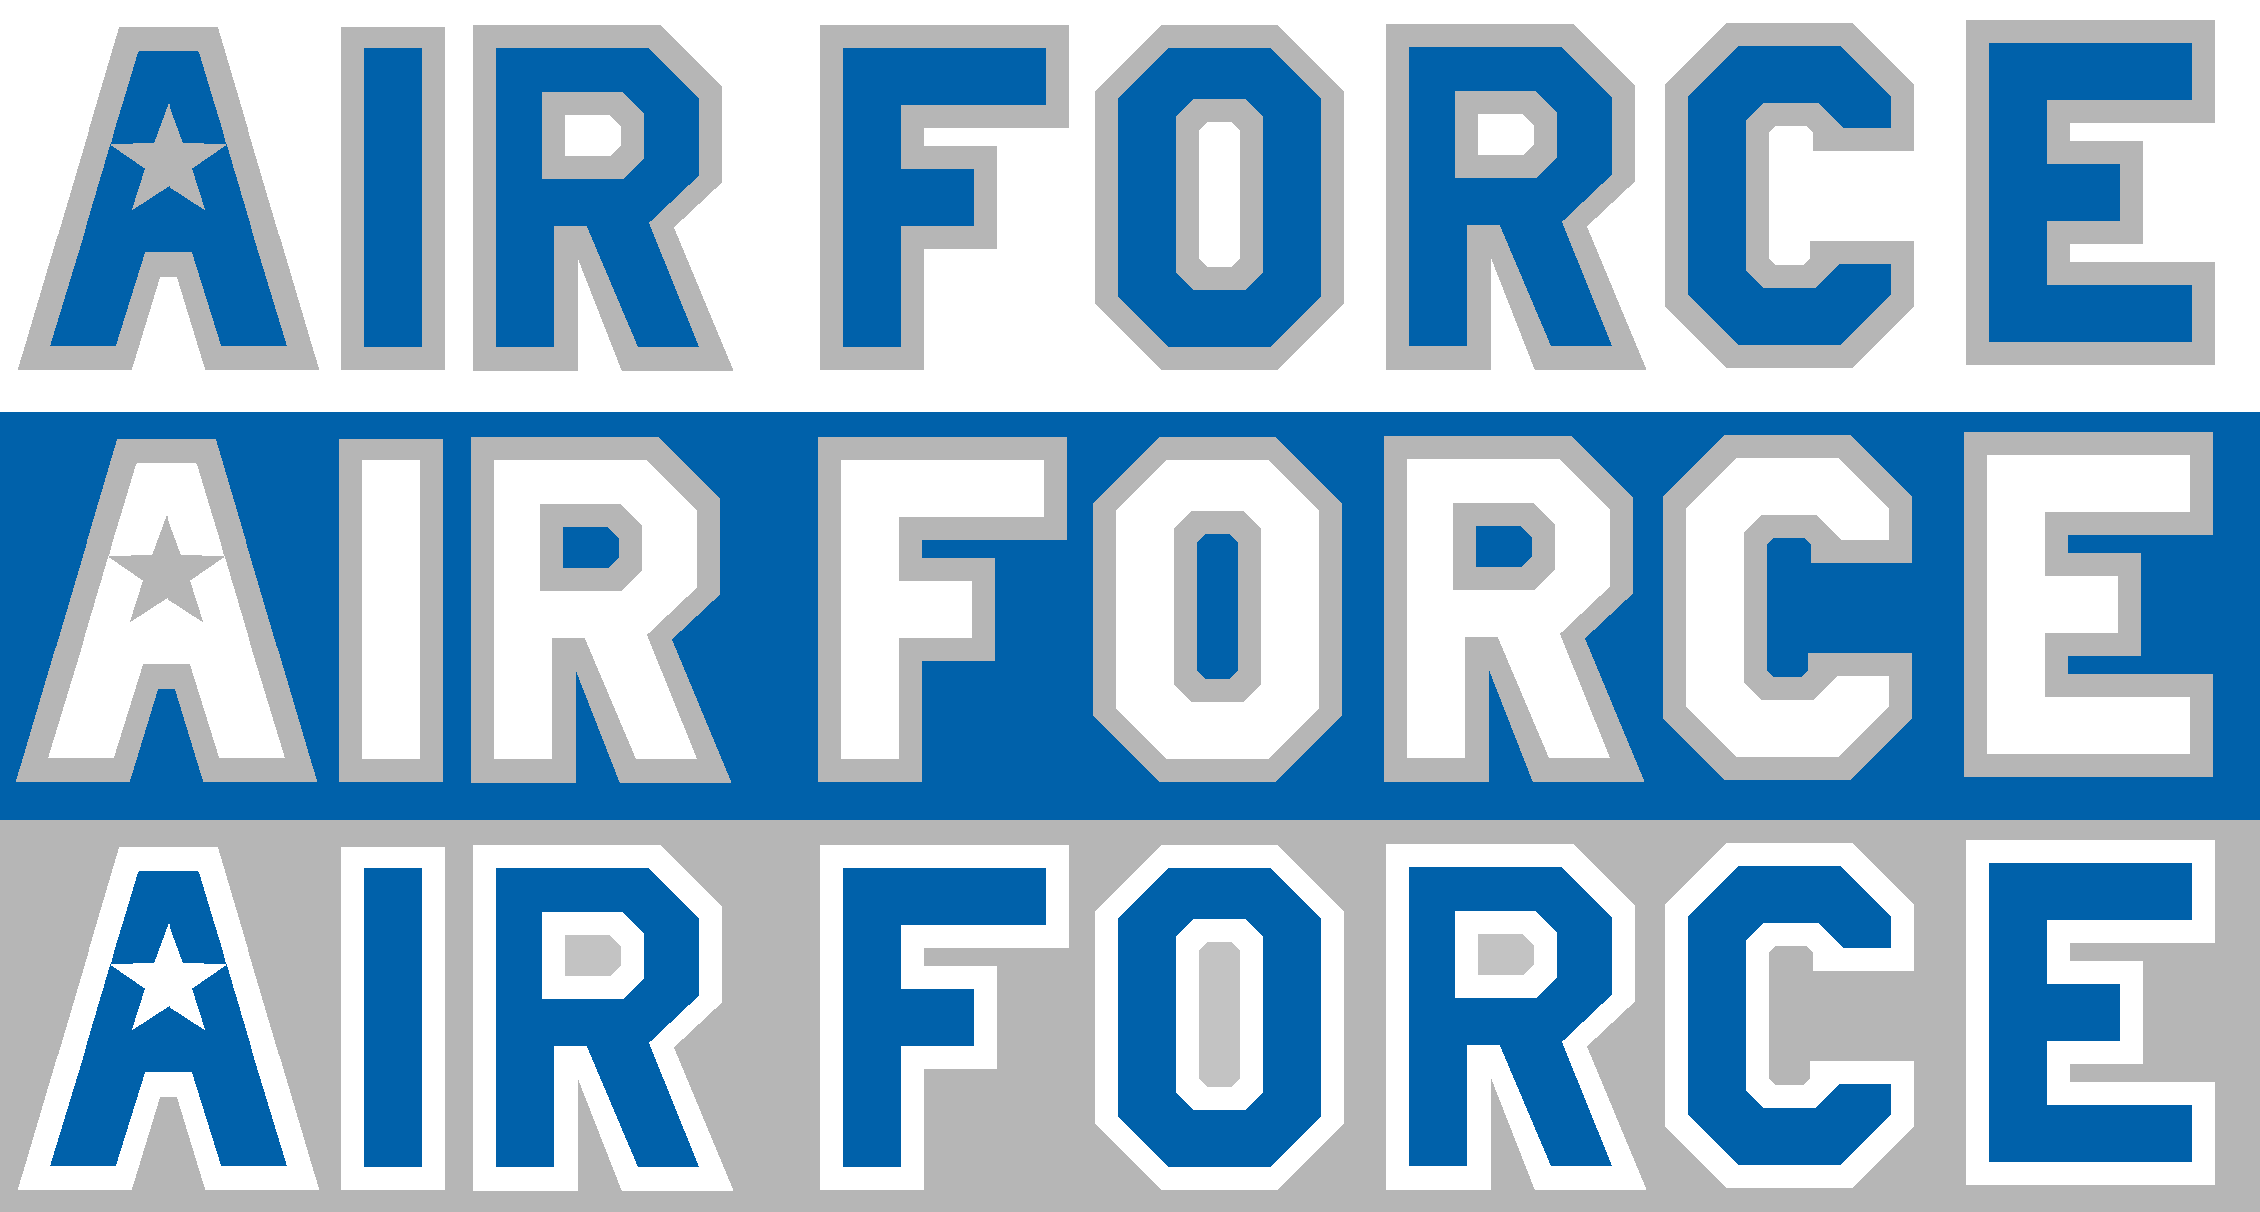 Air Force Football Logo - Air Force Rebrand (by MCH) (Updated) - Concepts - Chris Creamer's ...